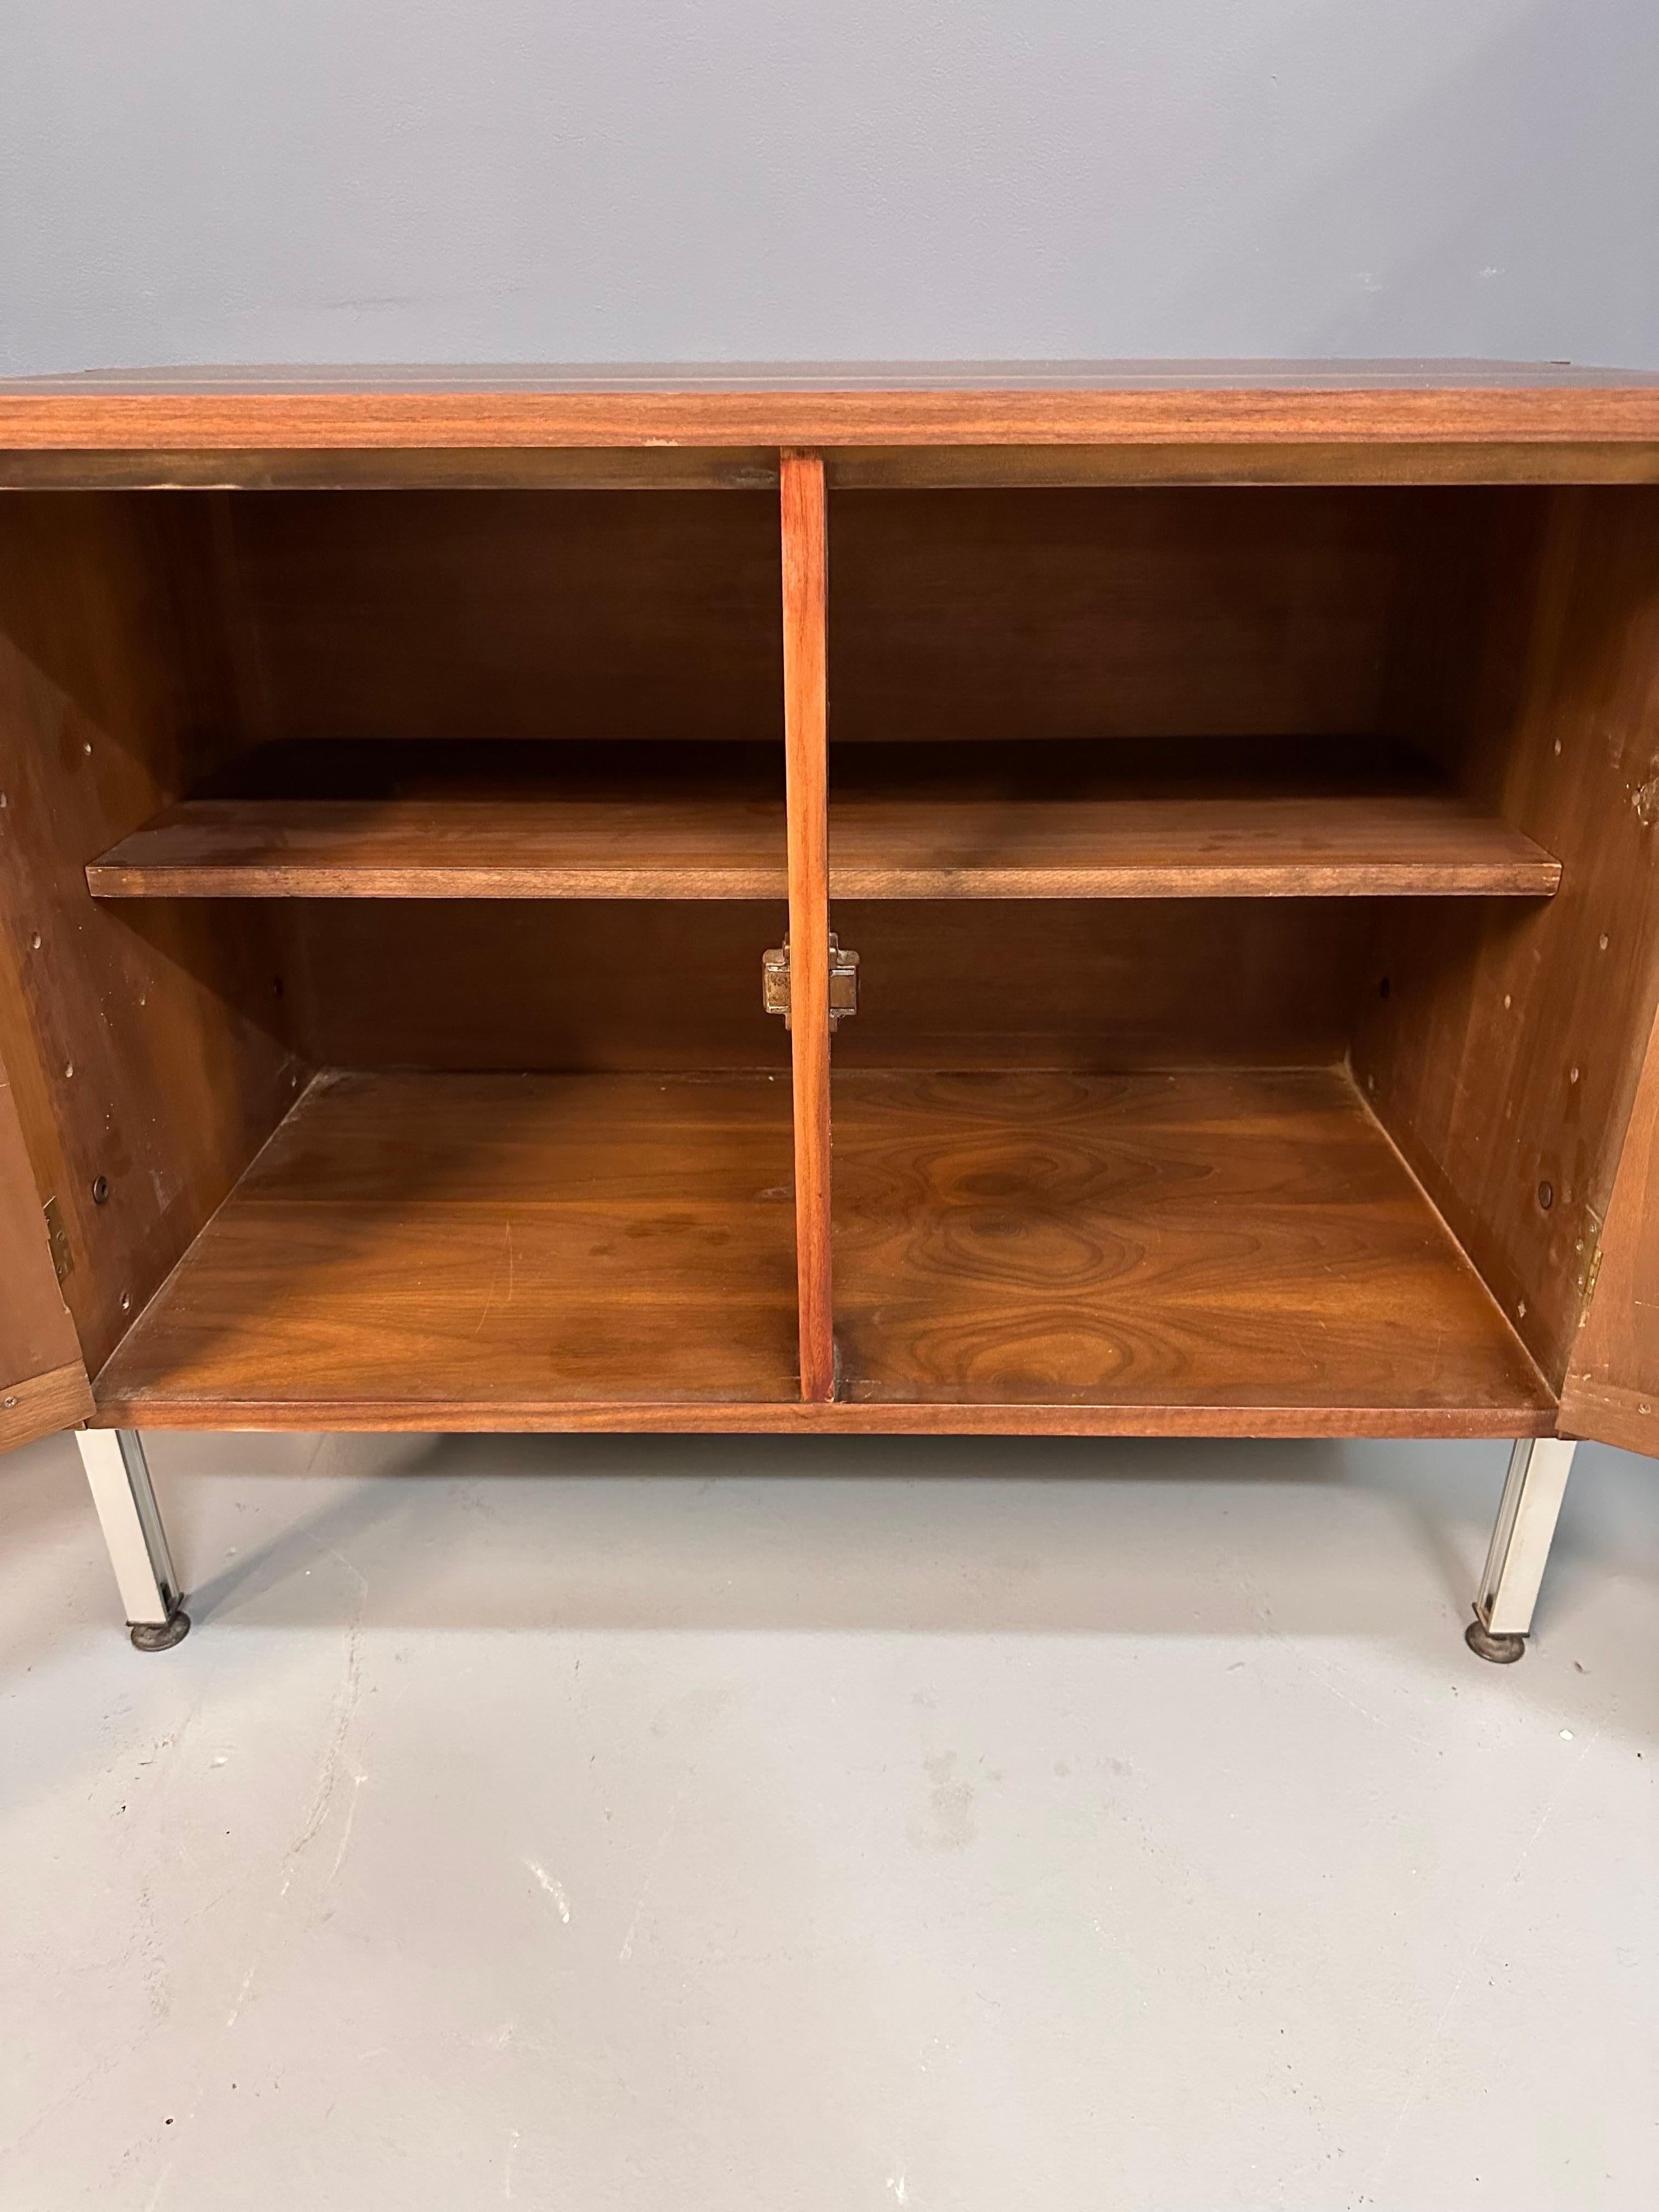 Pair of Midcentury Walnut Cabinets with Exposed Aluminum Legs Style of Wormley For Sale 3